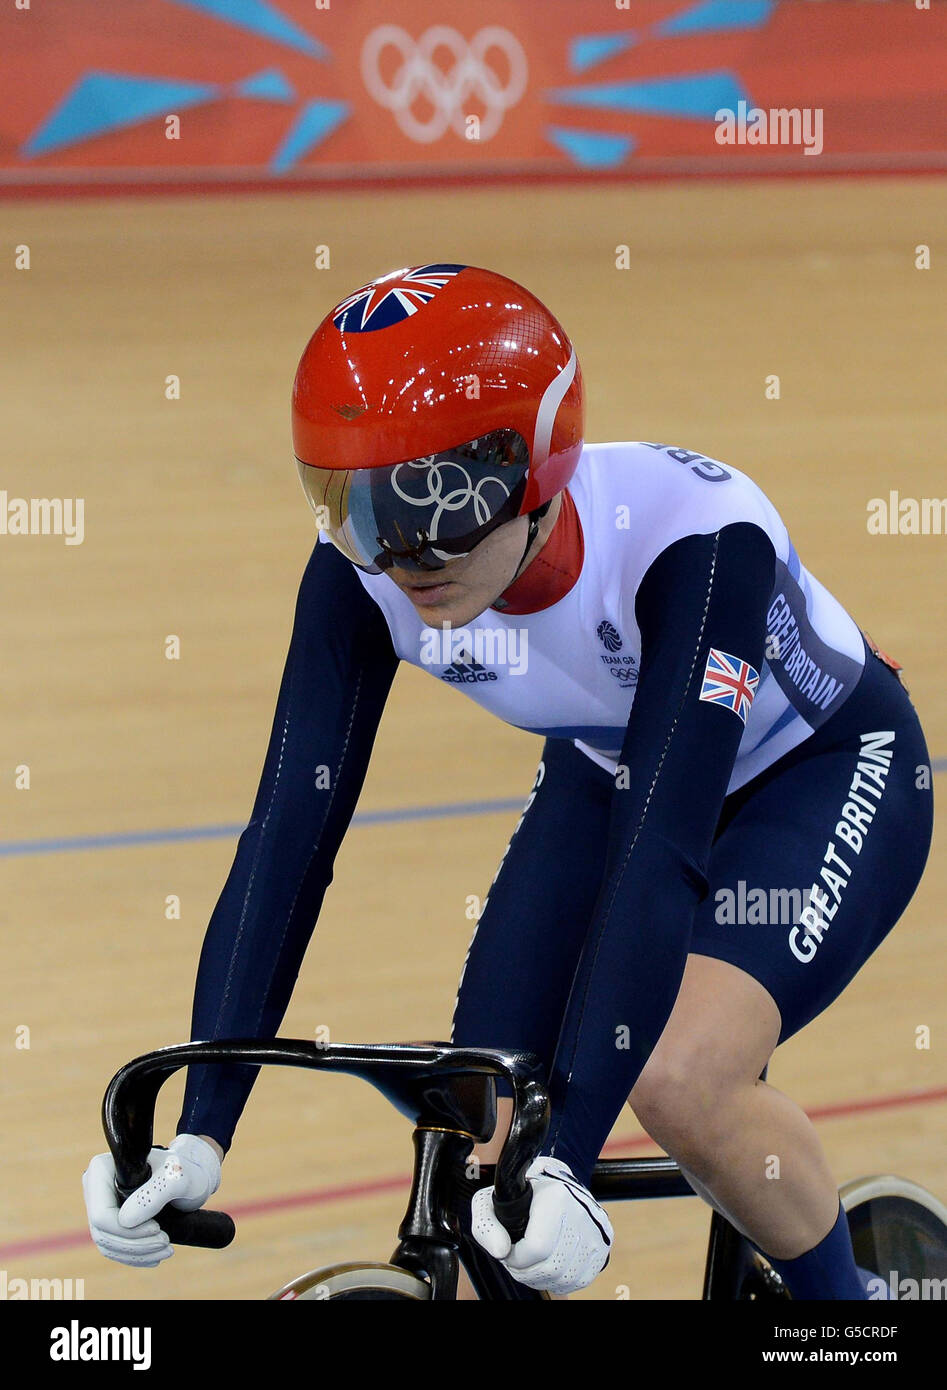 Great Britain's Victoria Pendleton in the Women's Sprint Quarter Final on day Ten of the Olympic Games at the Velodrome in London. Stock Photo